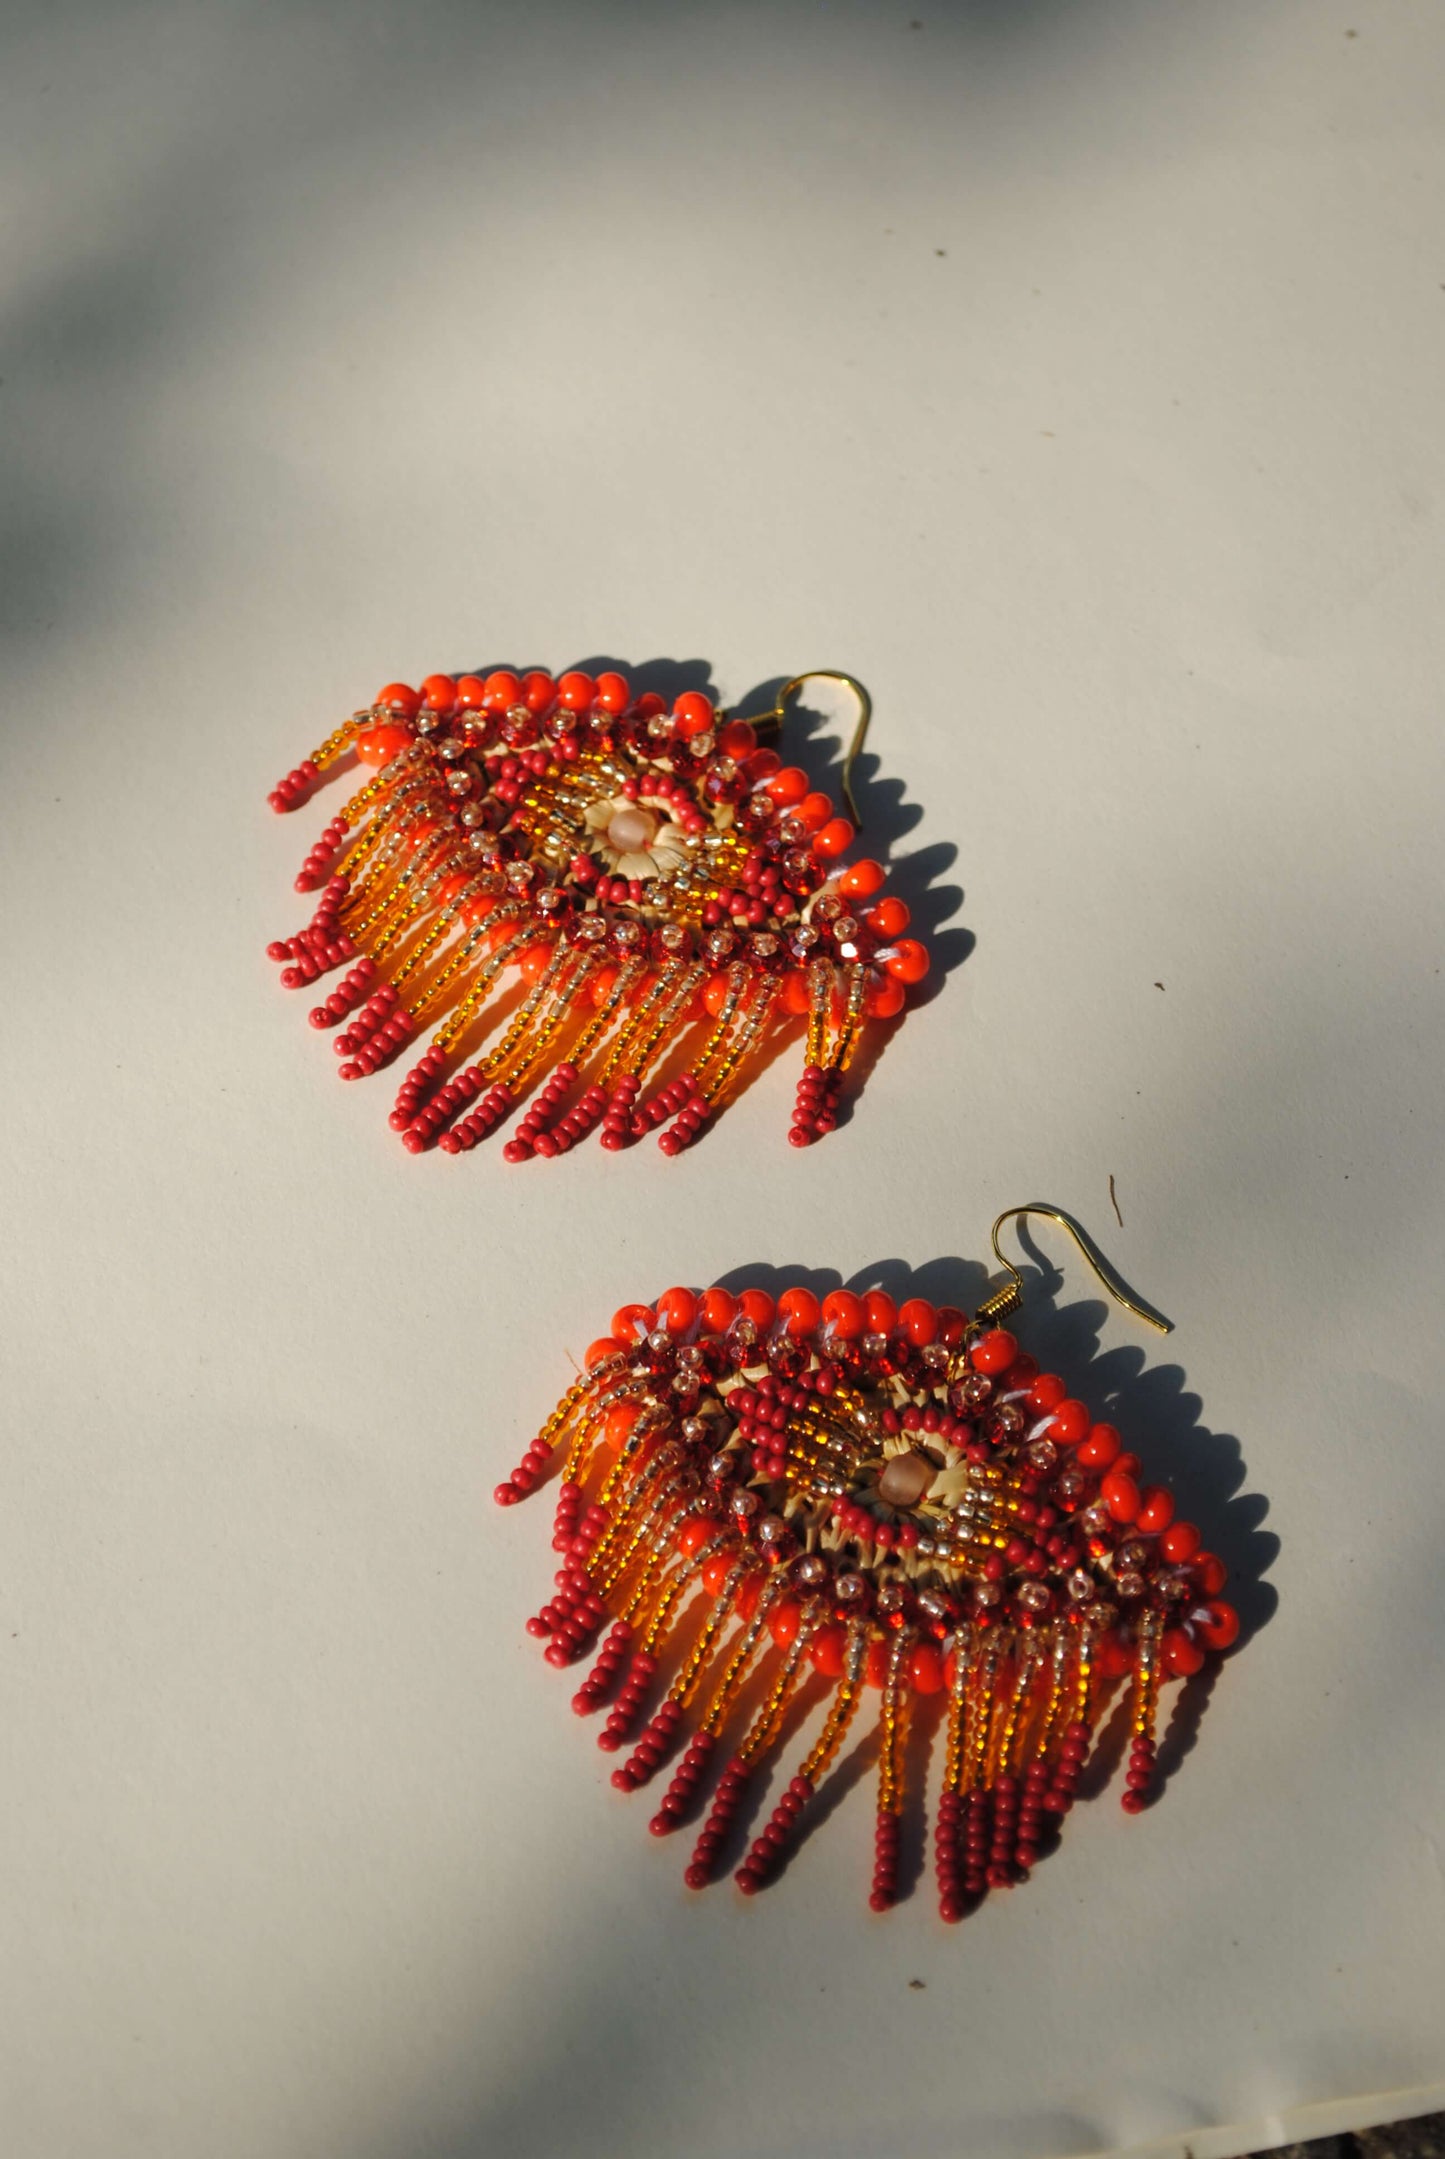 Truna natural fibre golden grass and zardosi handcrafted jewelry from Odisha, nazar red earrings